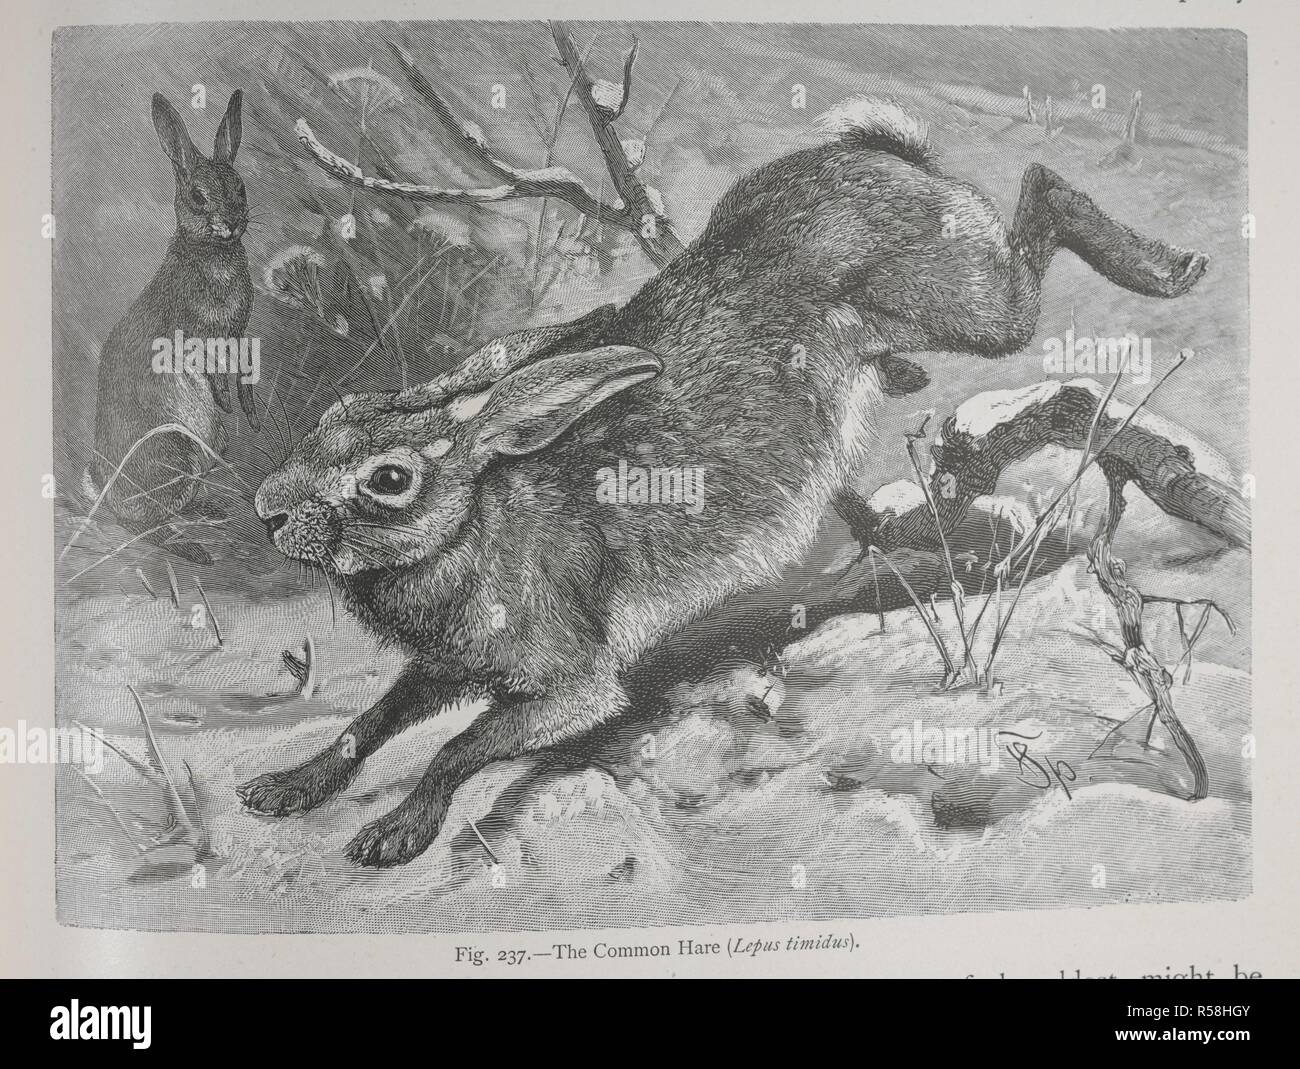 The common hare. The Geographical Distribution of Animals, with a study of the relations of living and extinct faunas as elucidating the past changes of the earth's surface. ... . London, 1876. Source: 07209.dd.1 page 237. Author: WALLACE, ALFRED RUSSEL. Stock Photo